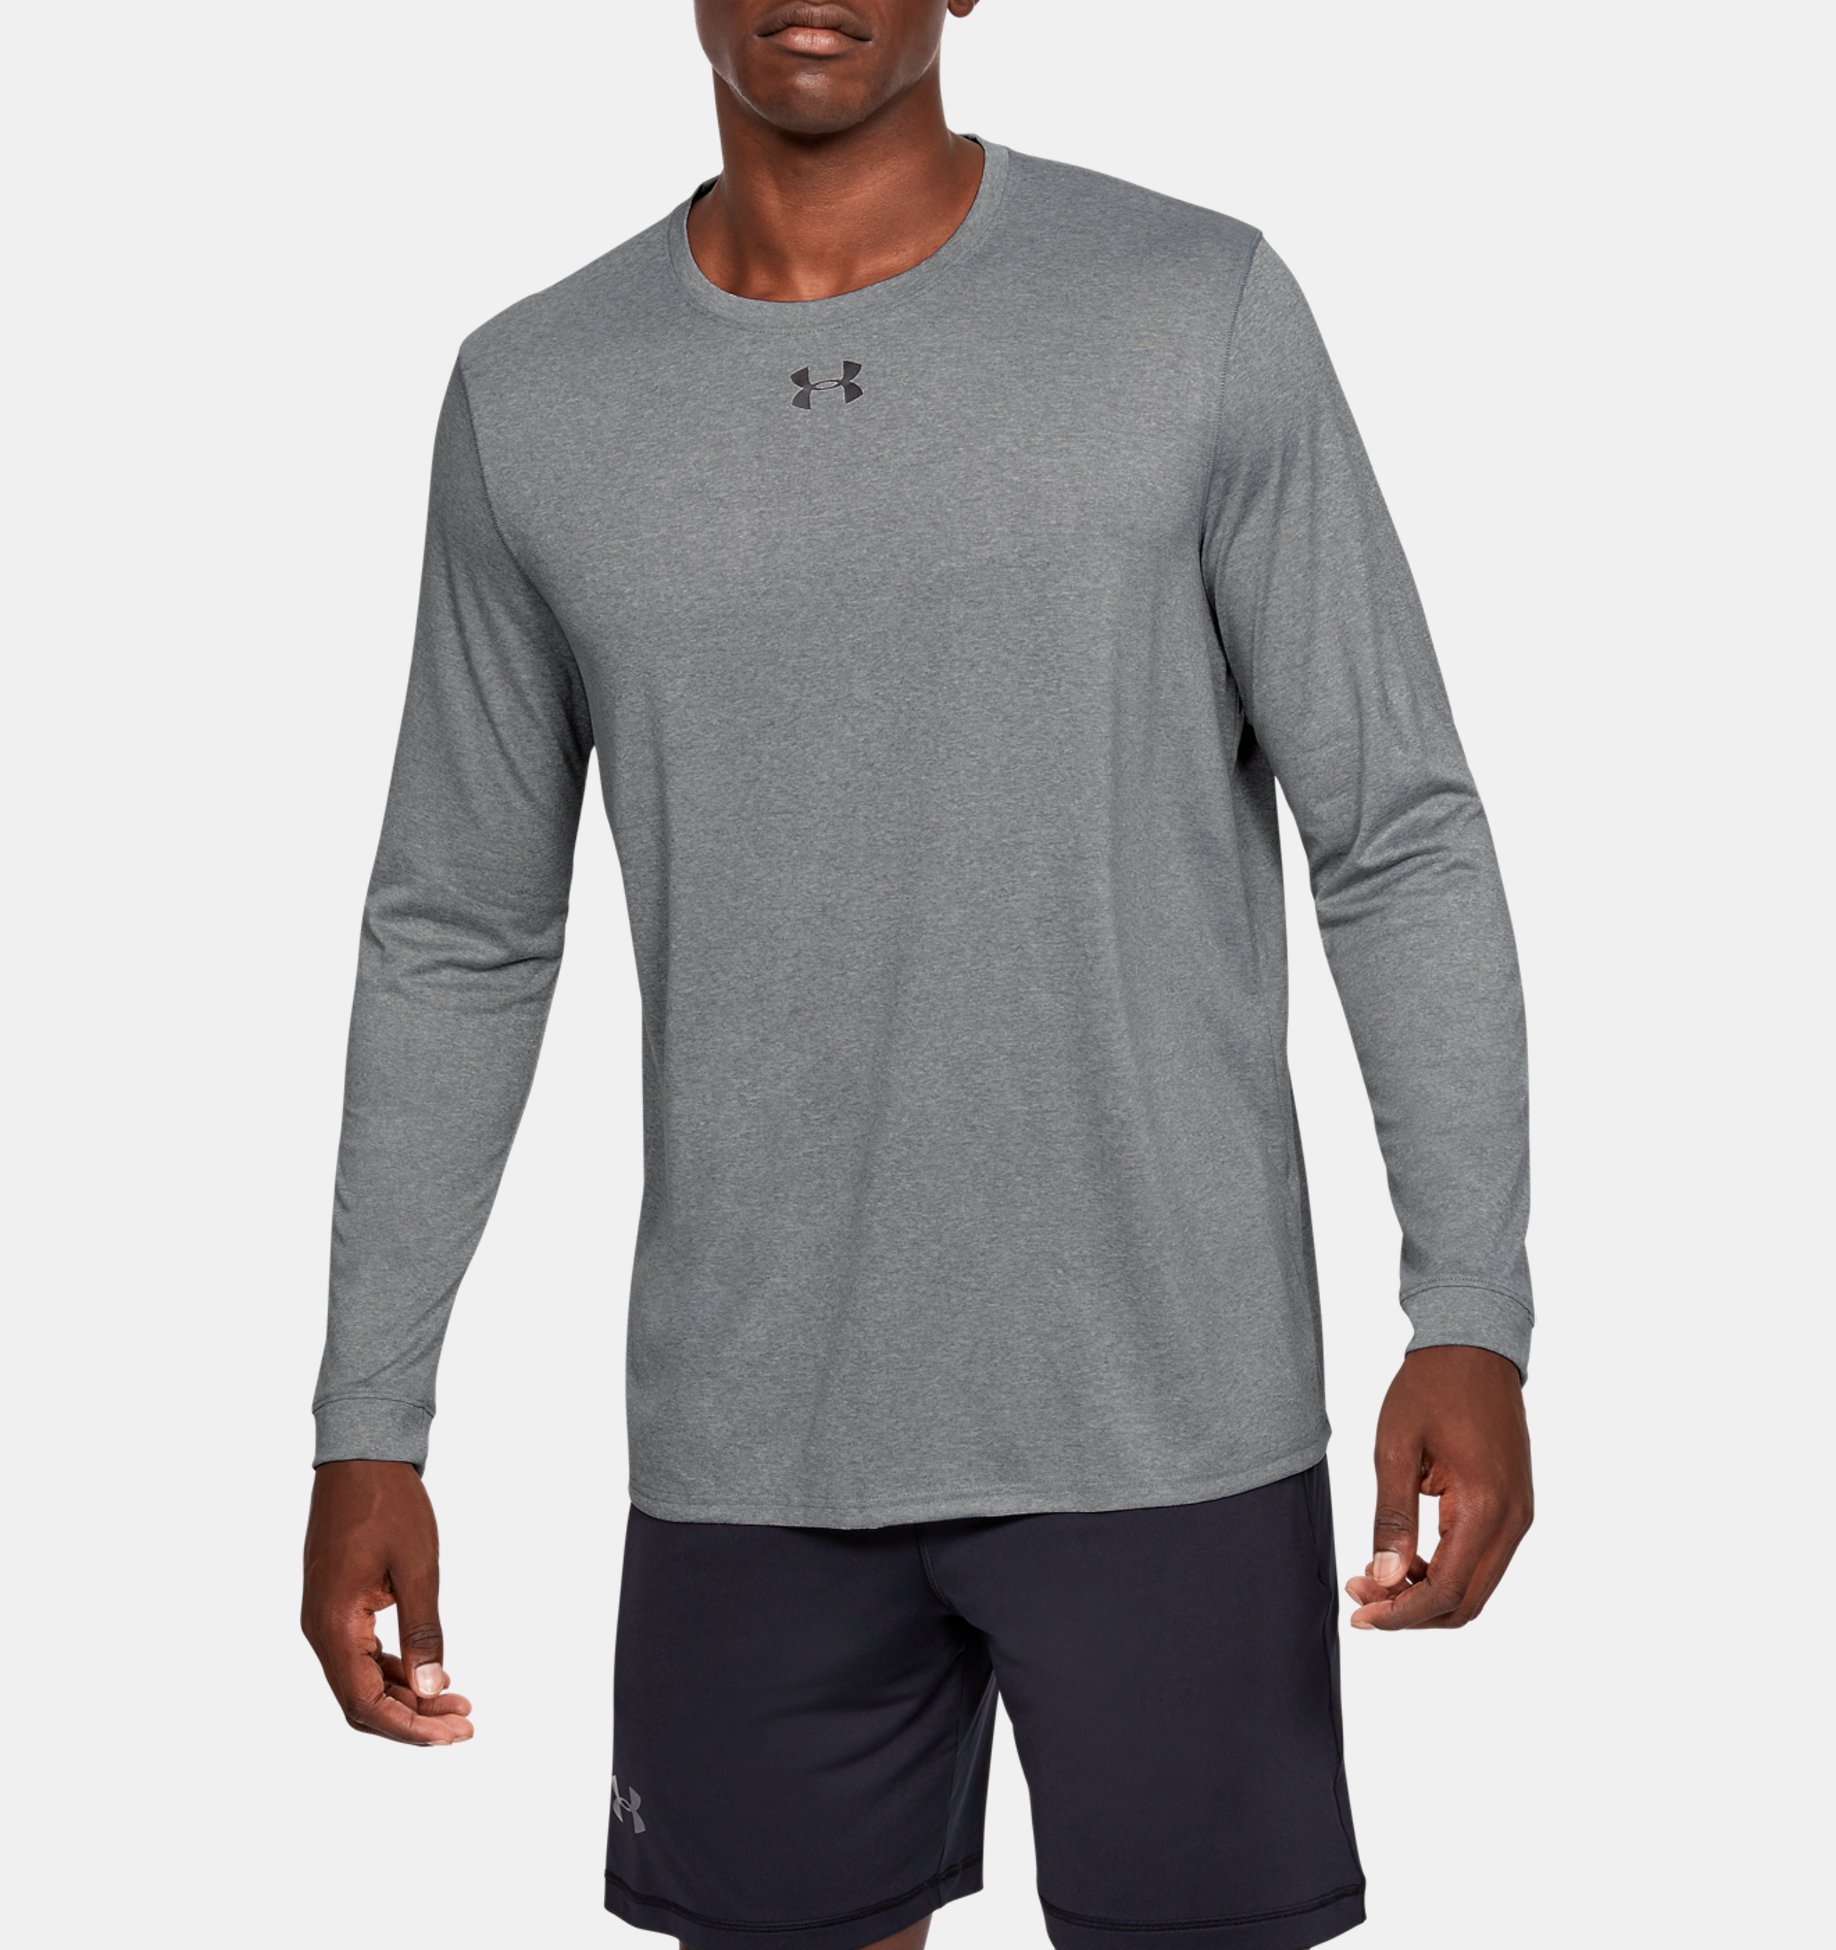 Under Armour Mens Swyft Long Sleeve 